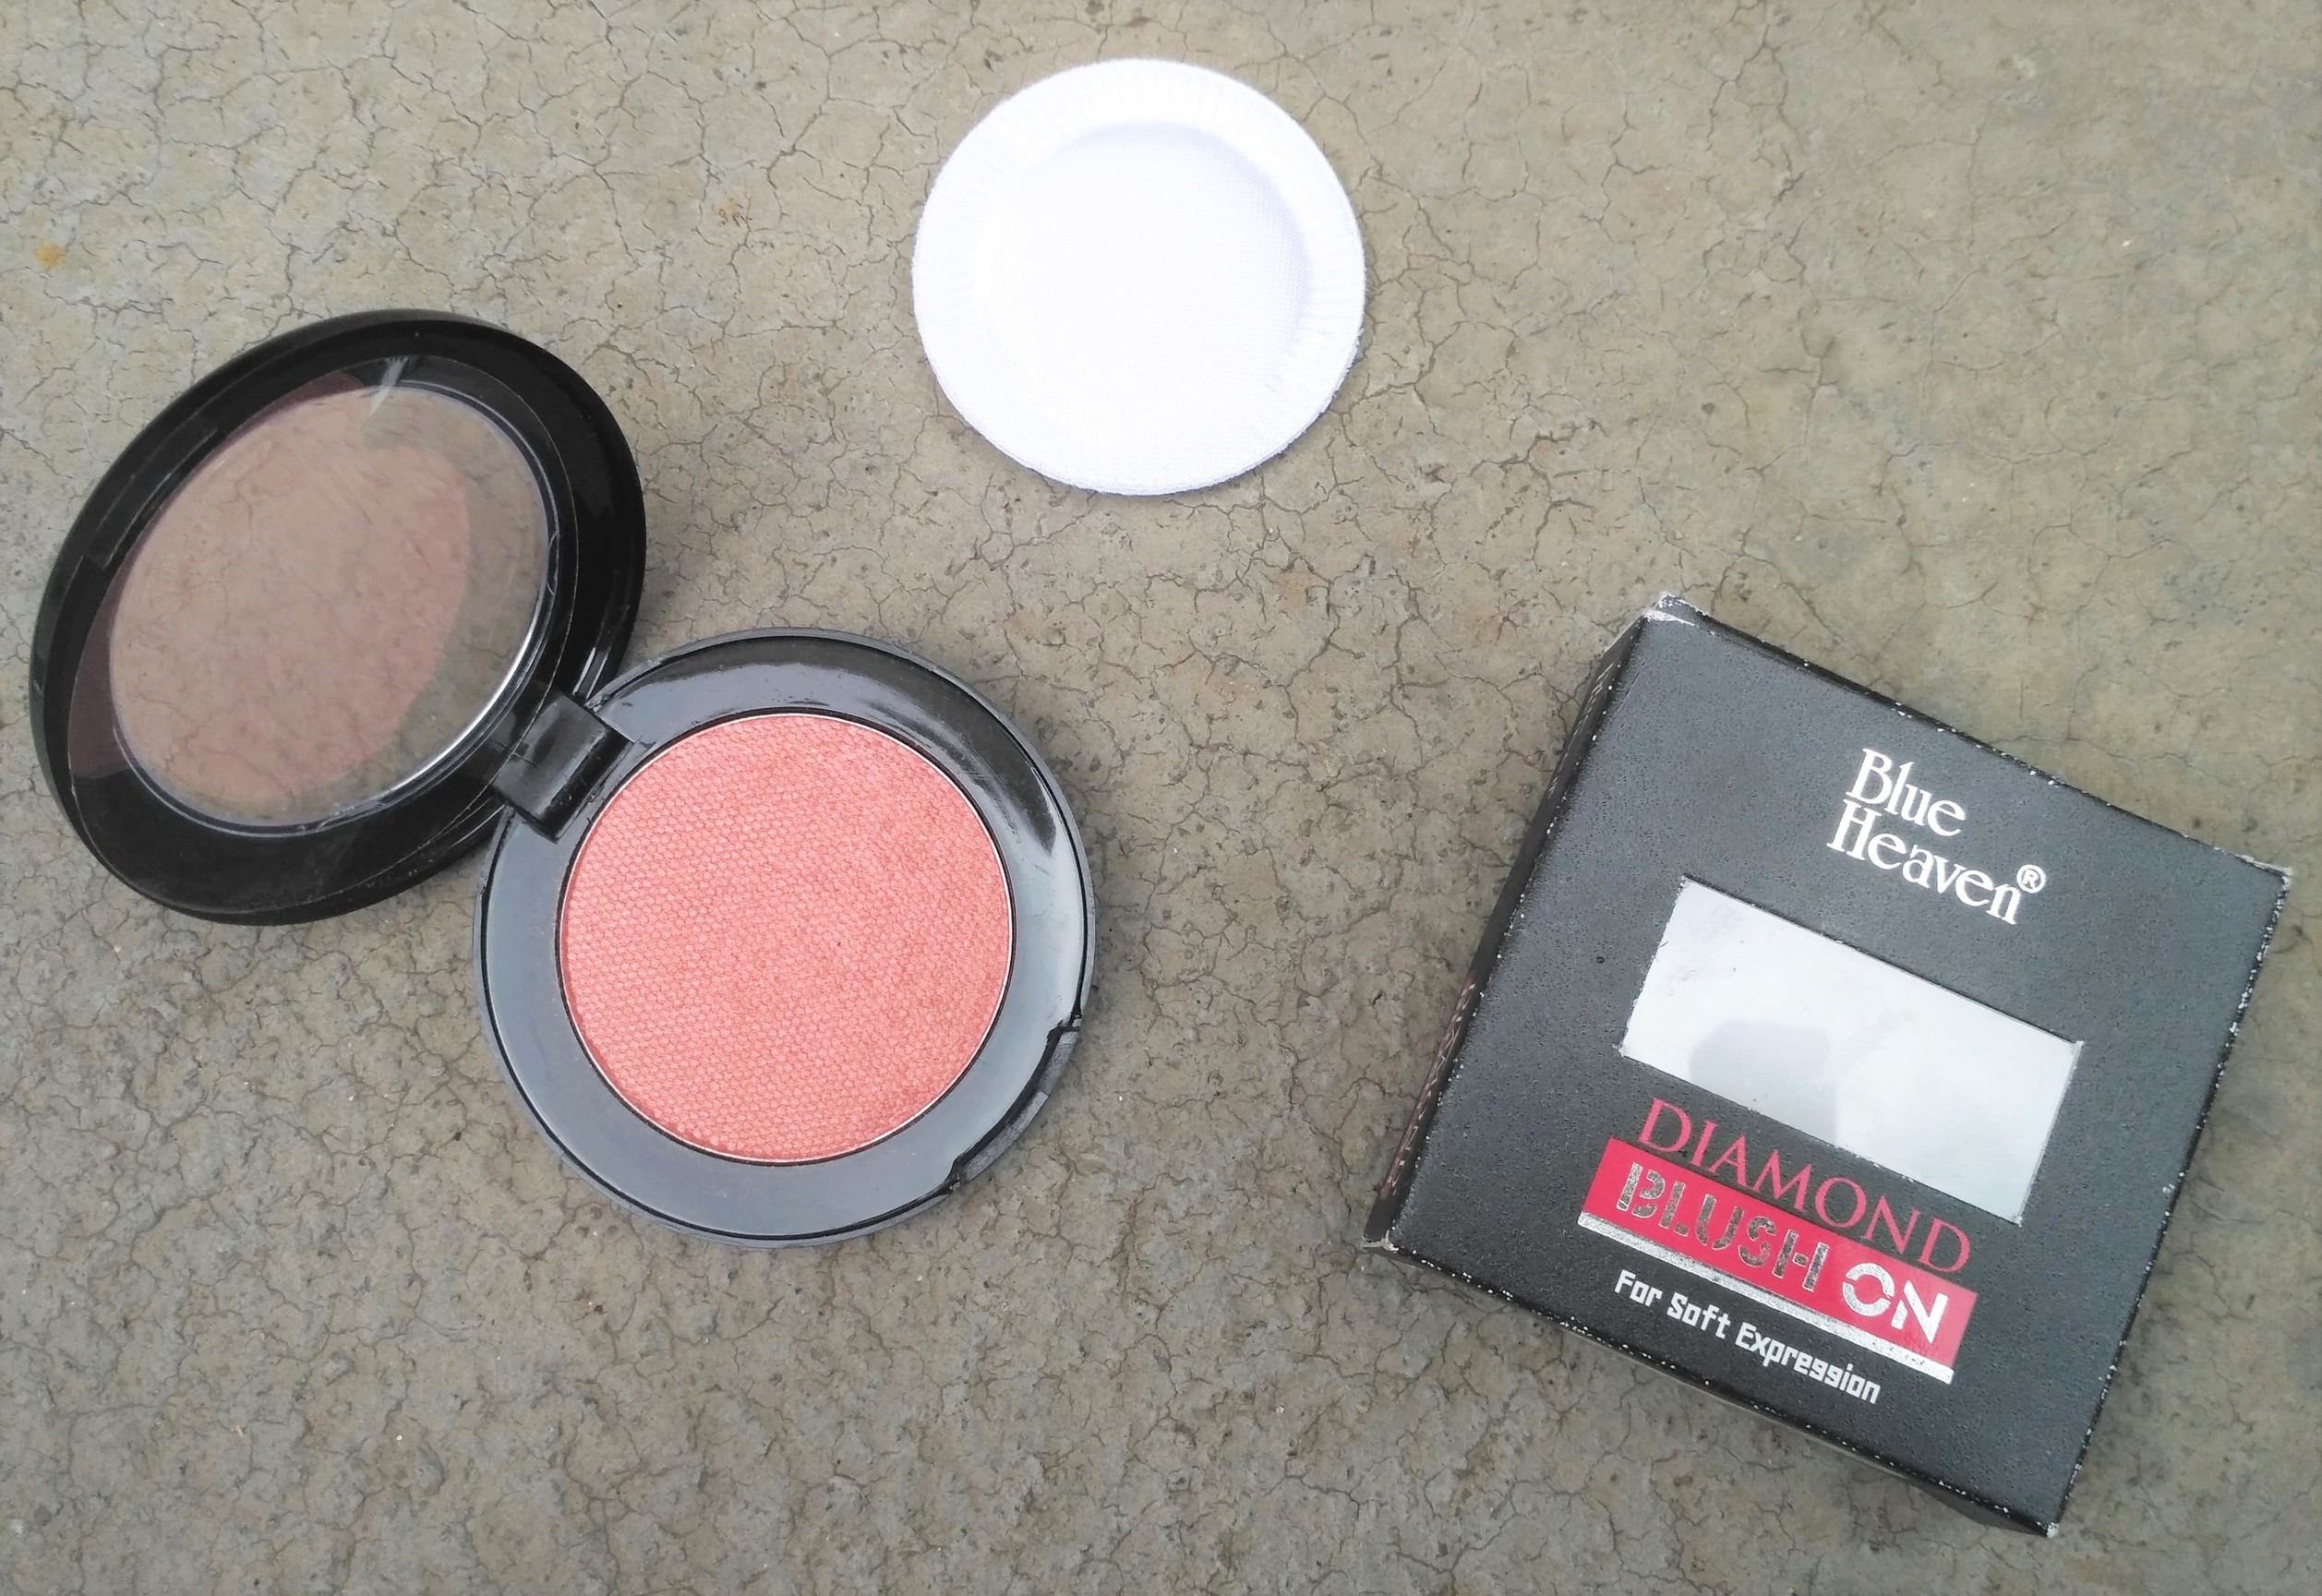 Blue Heaven Diamond Blush On 502 Review Swatches